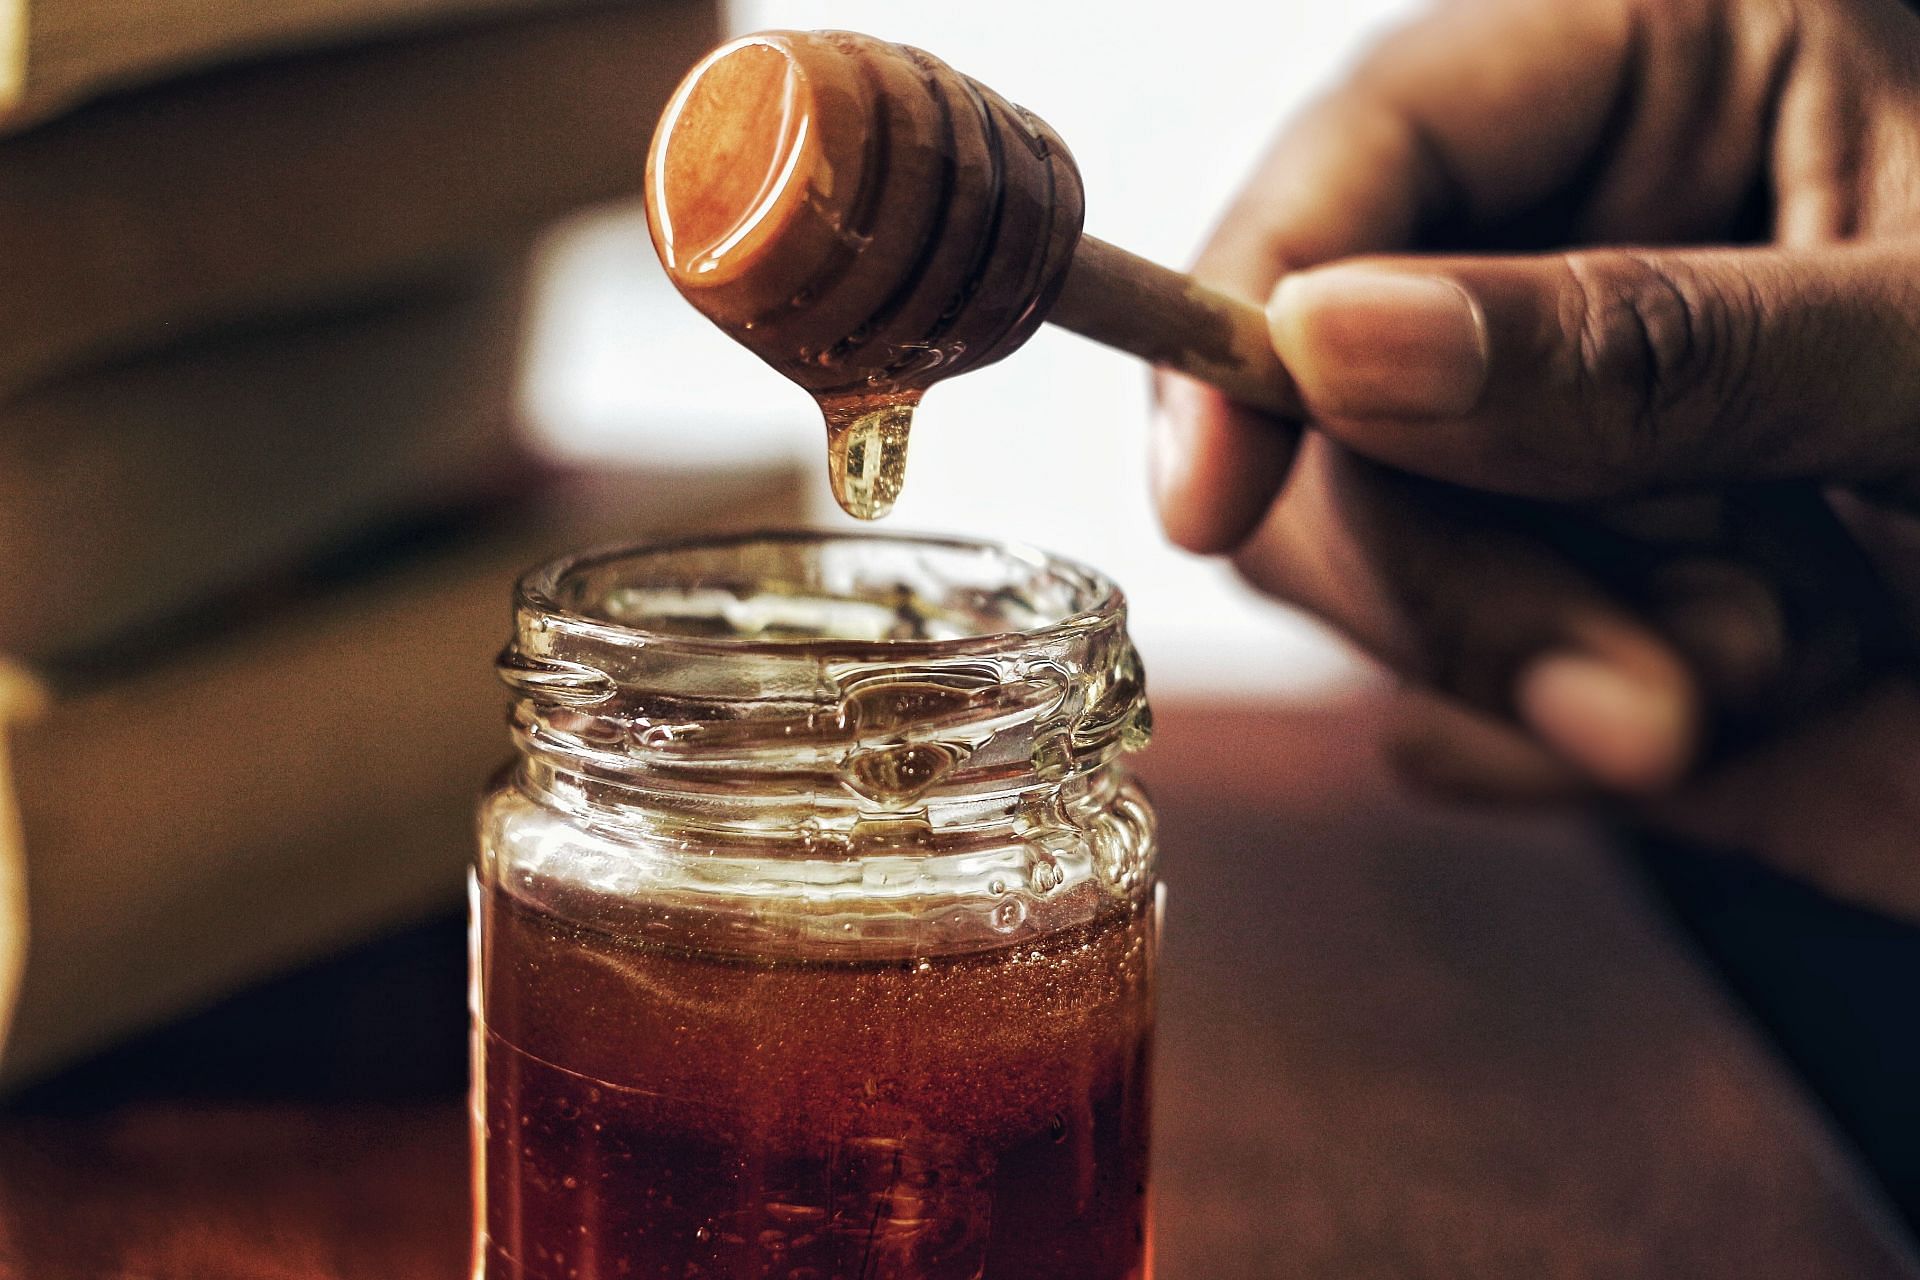 Honey in Faked foods in the world (Image via Unsplash/Arwin Neil)